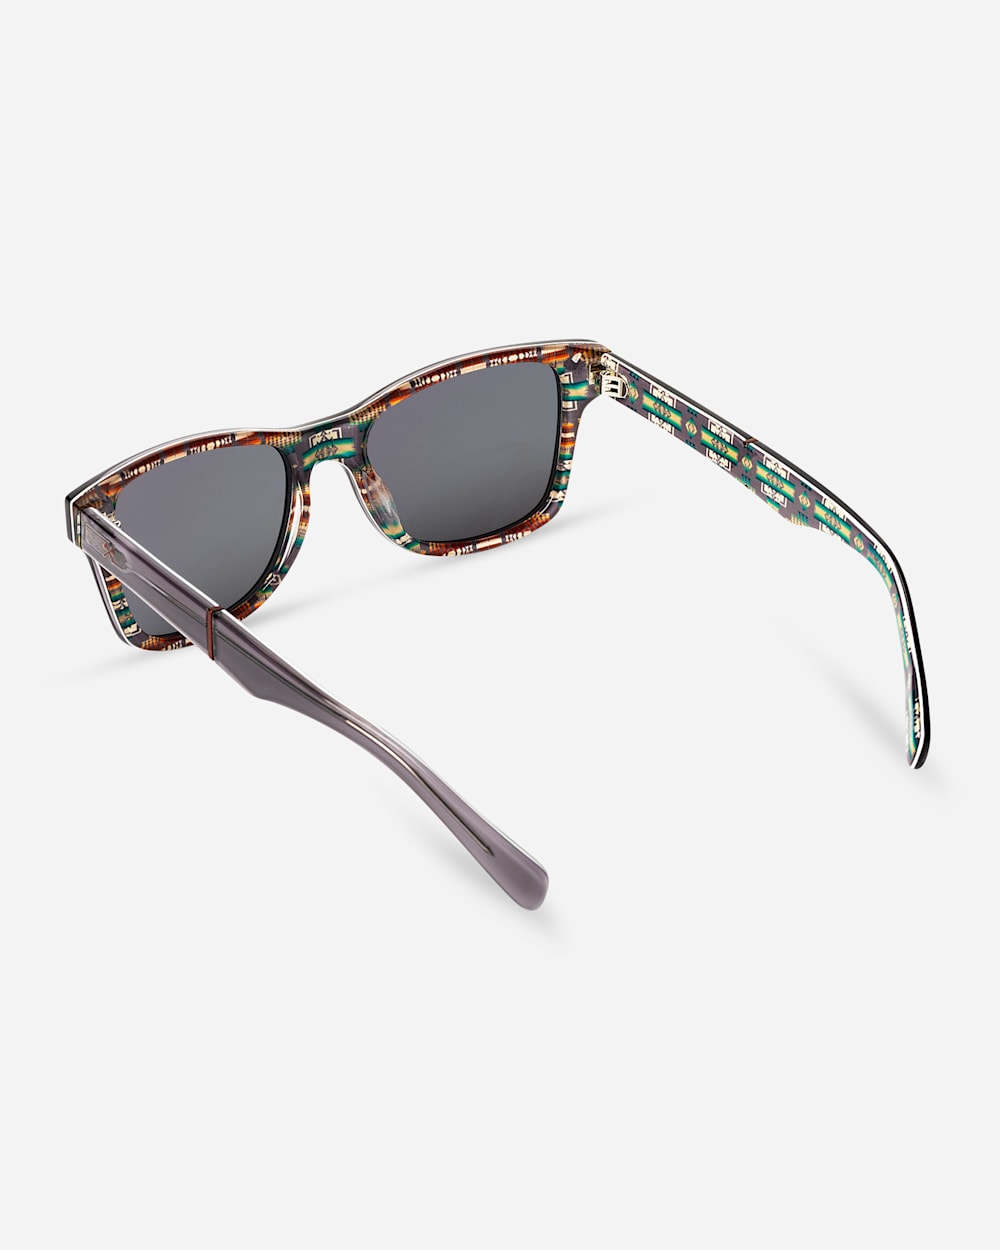 ADDITIONAL VIEW OF SHWOOD X PENDLETON CANBY SUNGLASSES IN CHIEF JOSEPH GREY image number 5